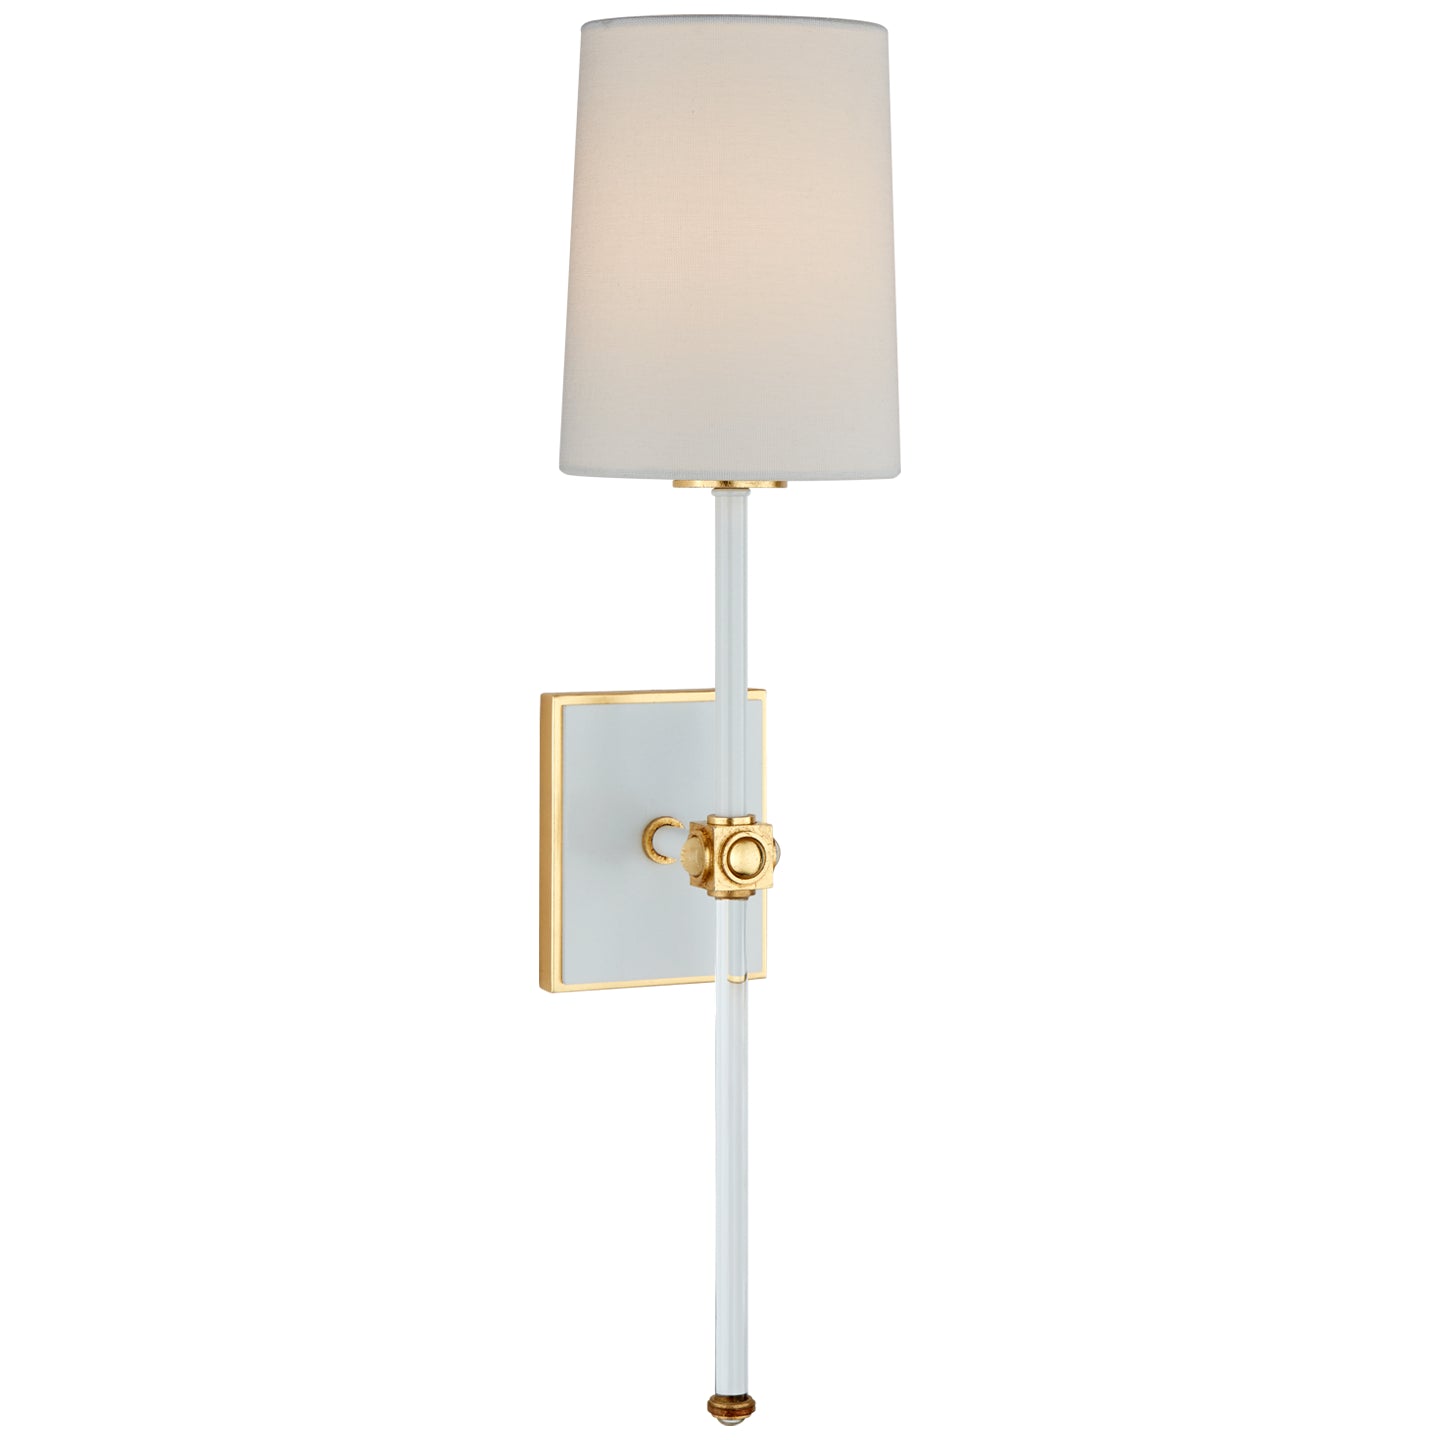 Visual Comfort Signature - JN 2051WHT/CG-L - One Light Wall Sconce - Lucia - White and Crystal